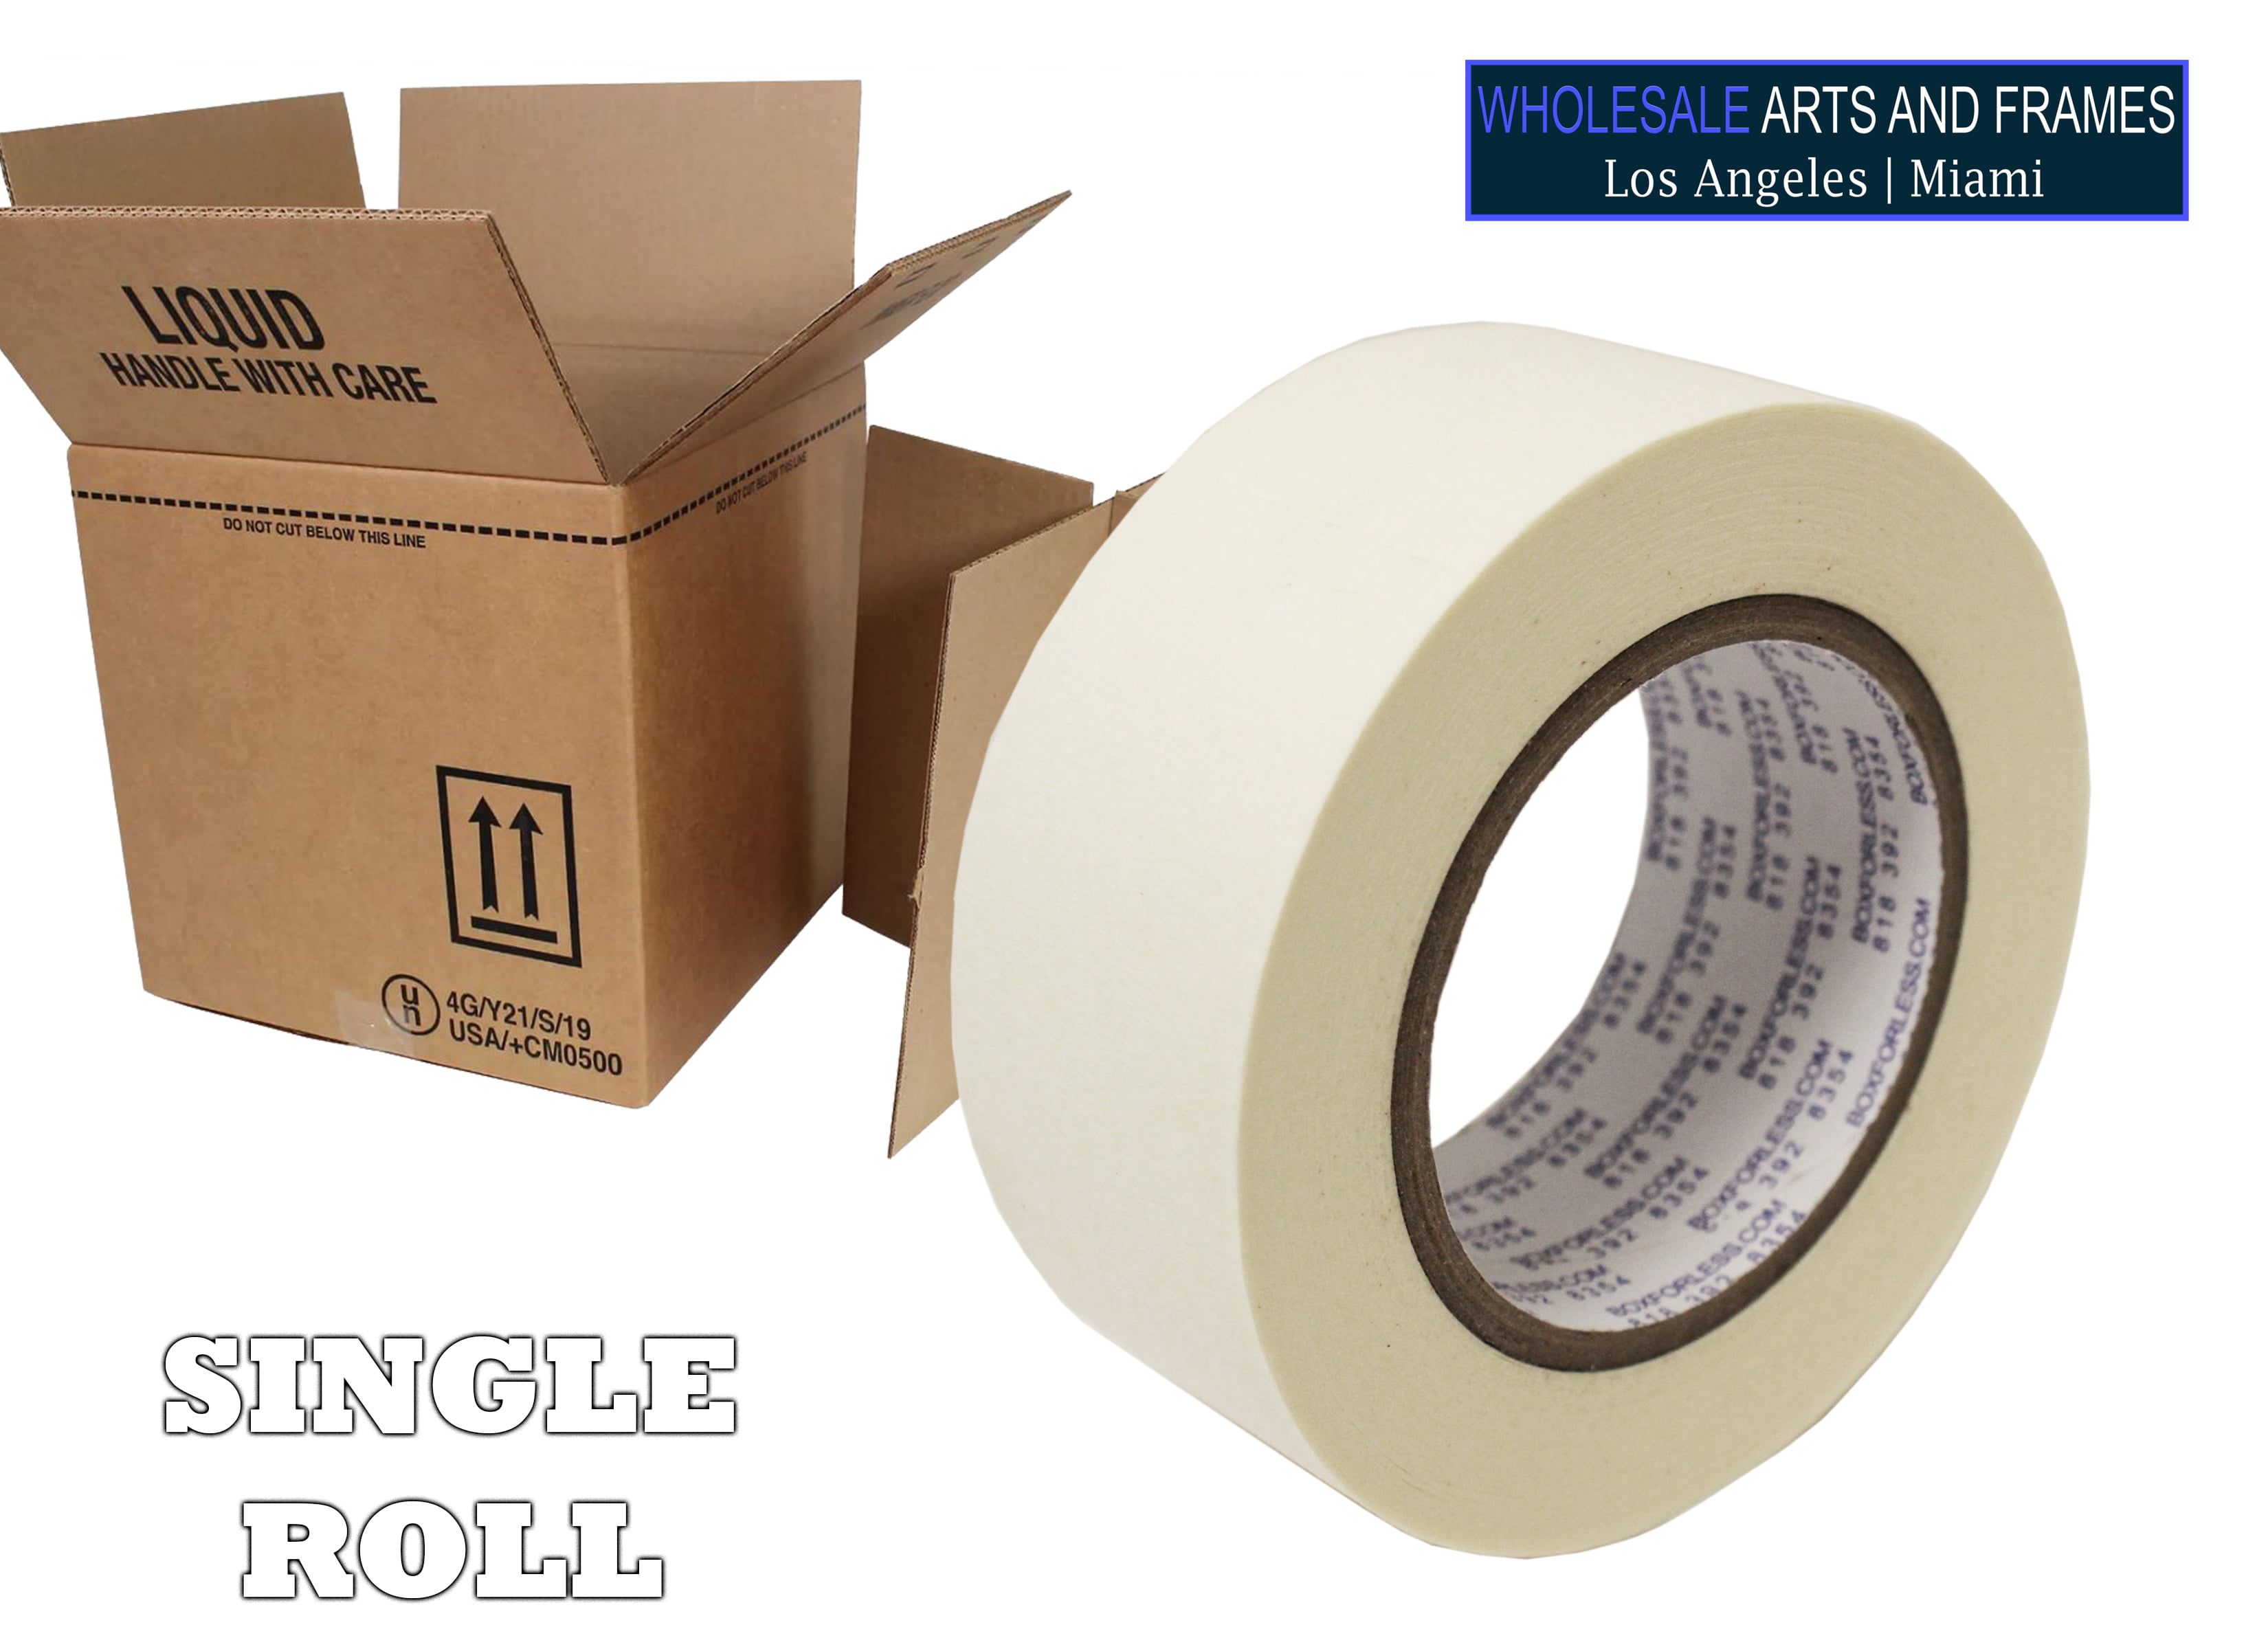 2 Rolls Wide Masking Tape 1 inch x 55 Yards, General Purpose Beige White Painters Tape for Painting Labeling Crafts School Projects Home Office